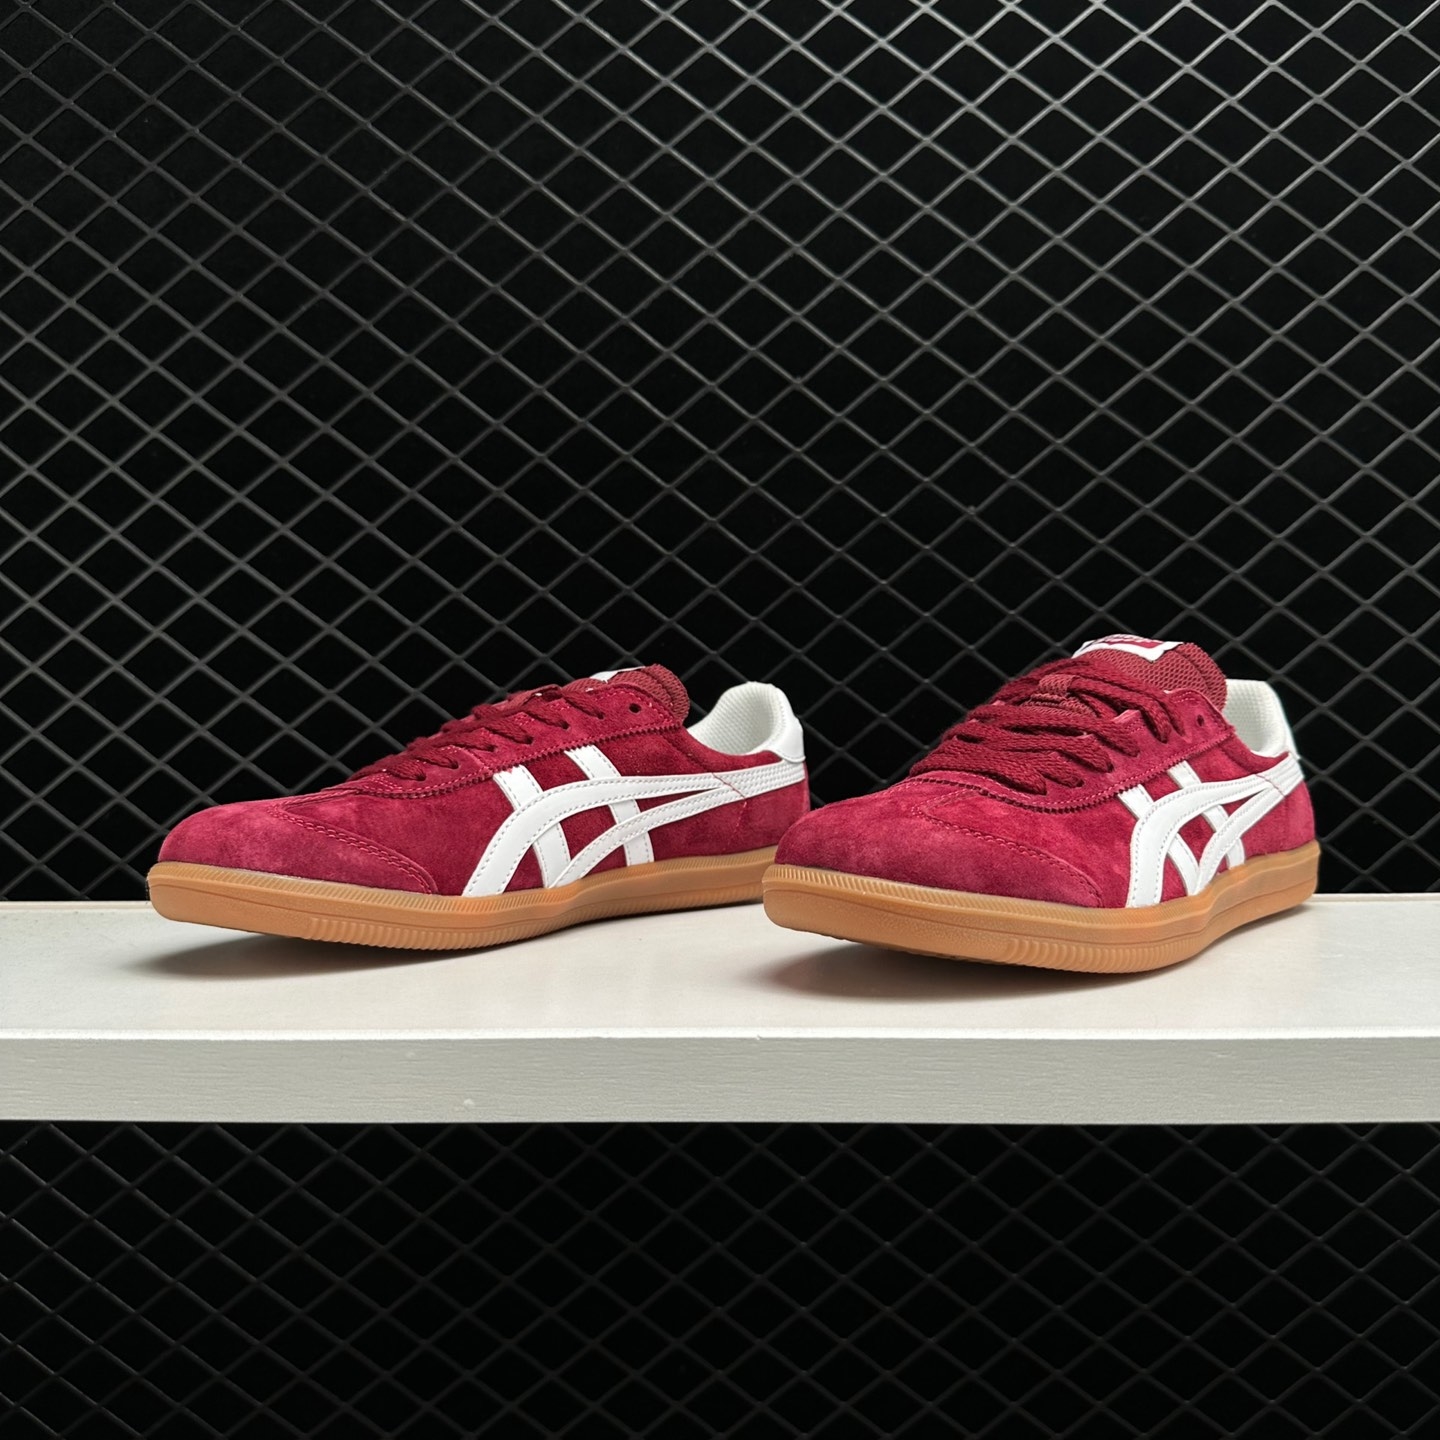 Onitsuka Tiger Tokuten Burgundy White - Classic Style and Elegance